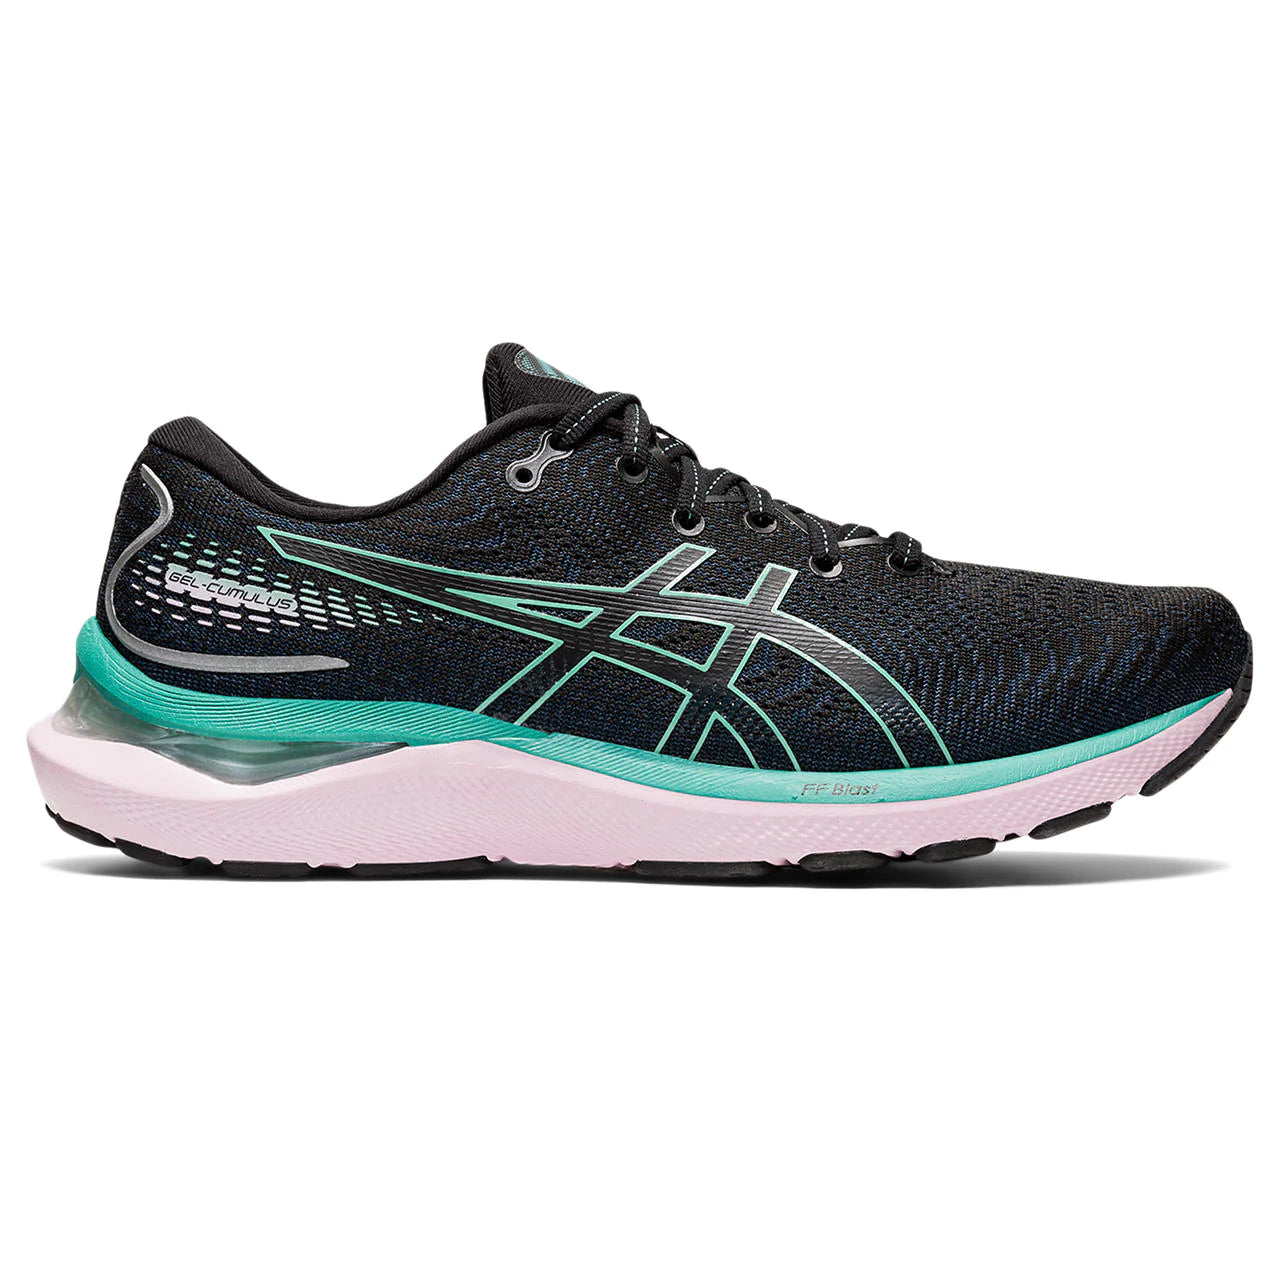 Lateral view of the Women's Gel Cumulus 24 by ASIC in the color Black/Sage